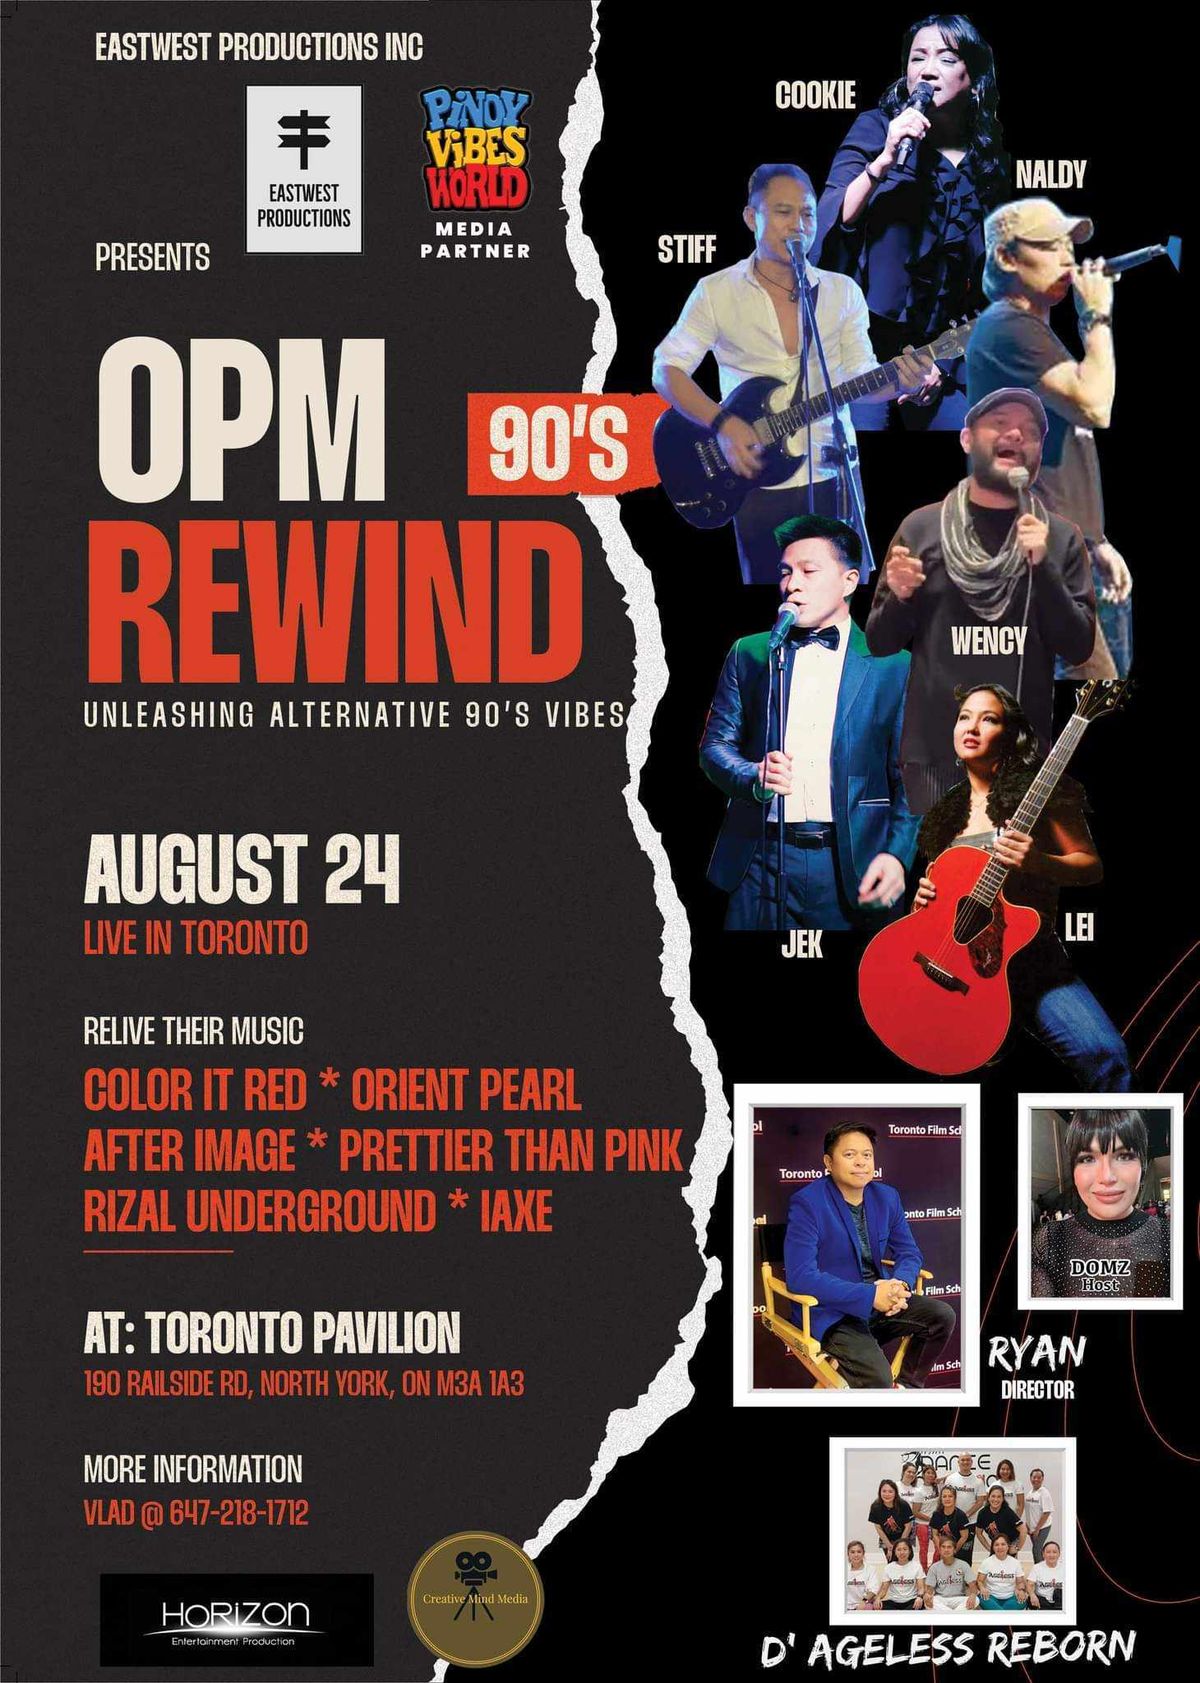 OPM 90's REWIND "MOVED NEXT YEAR"